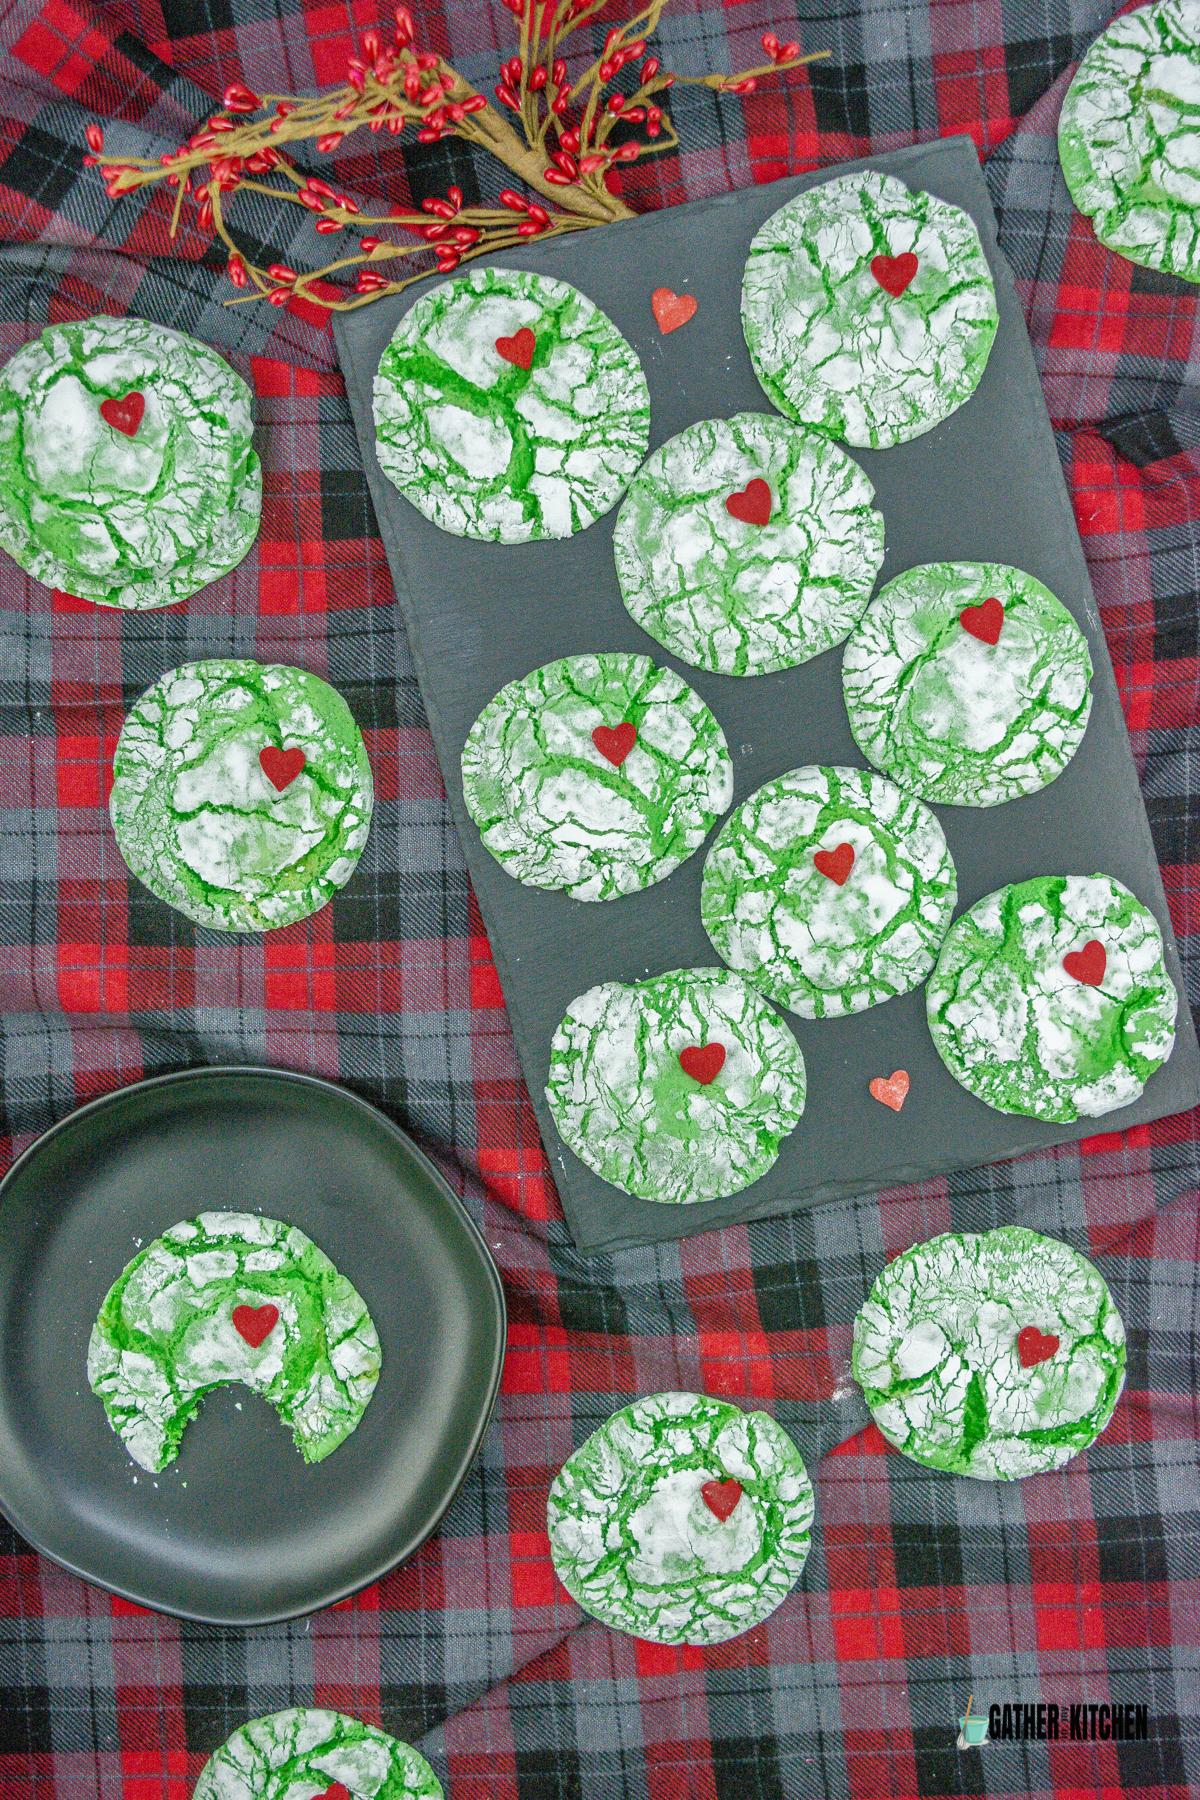 Grinch cookies spread out on the table.